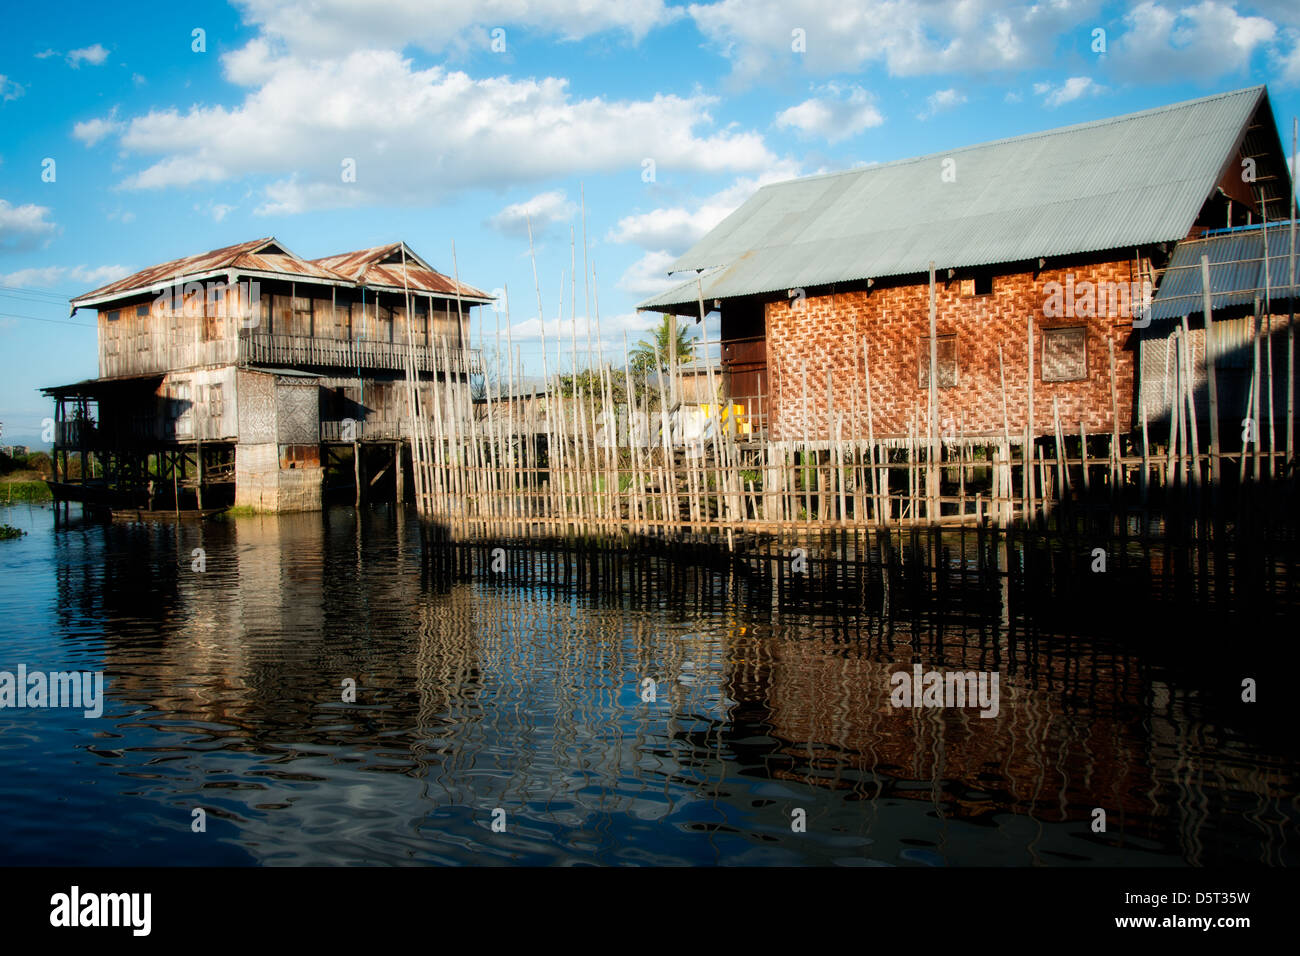 People live in simple houses made from wood and woven bamboo on Inle Lake Stock Photo